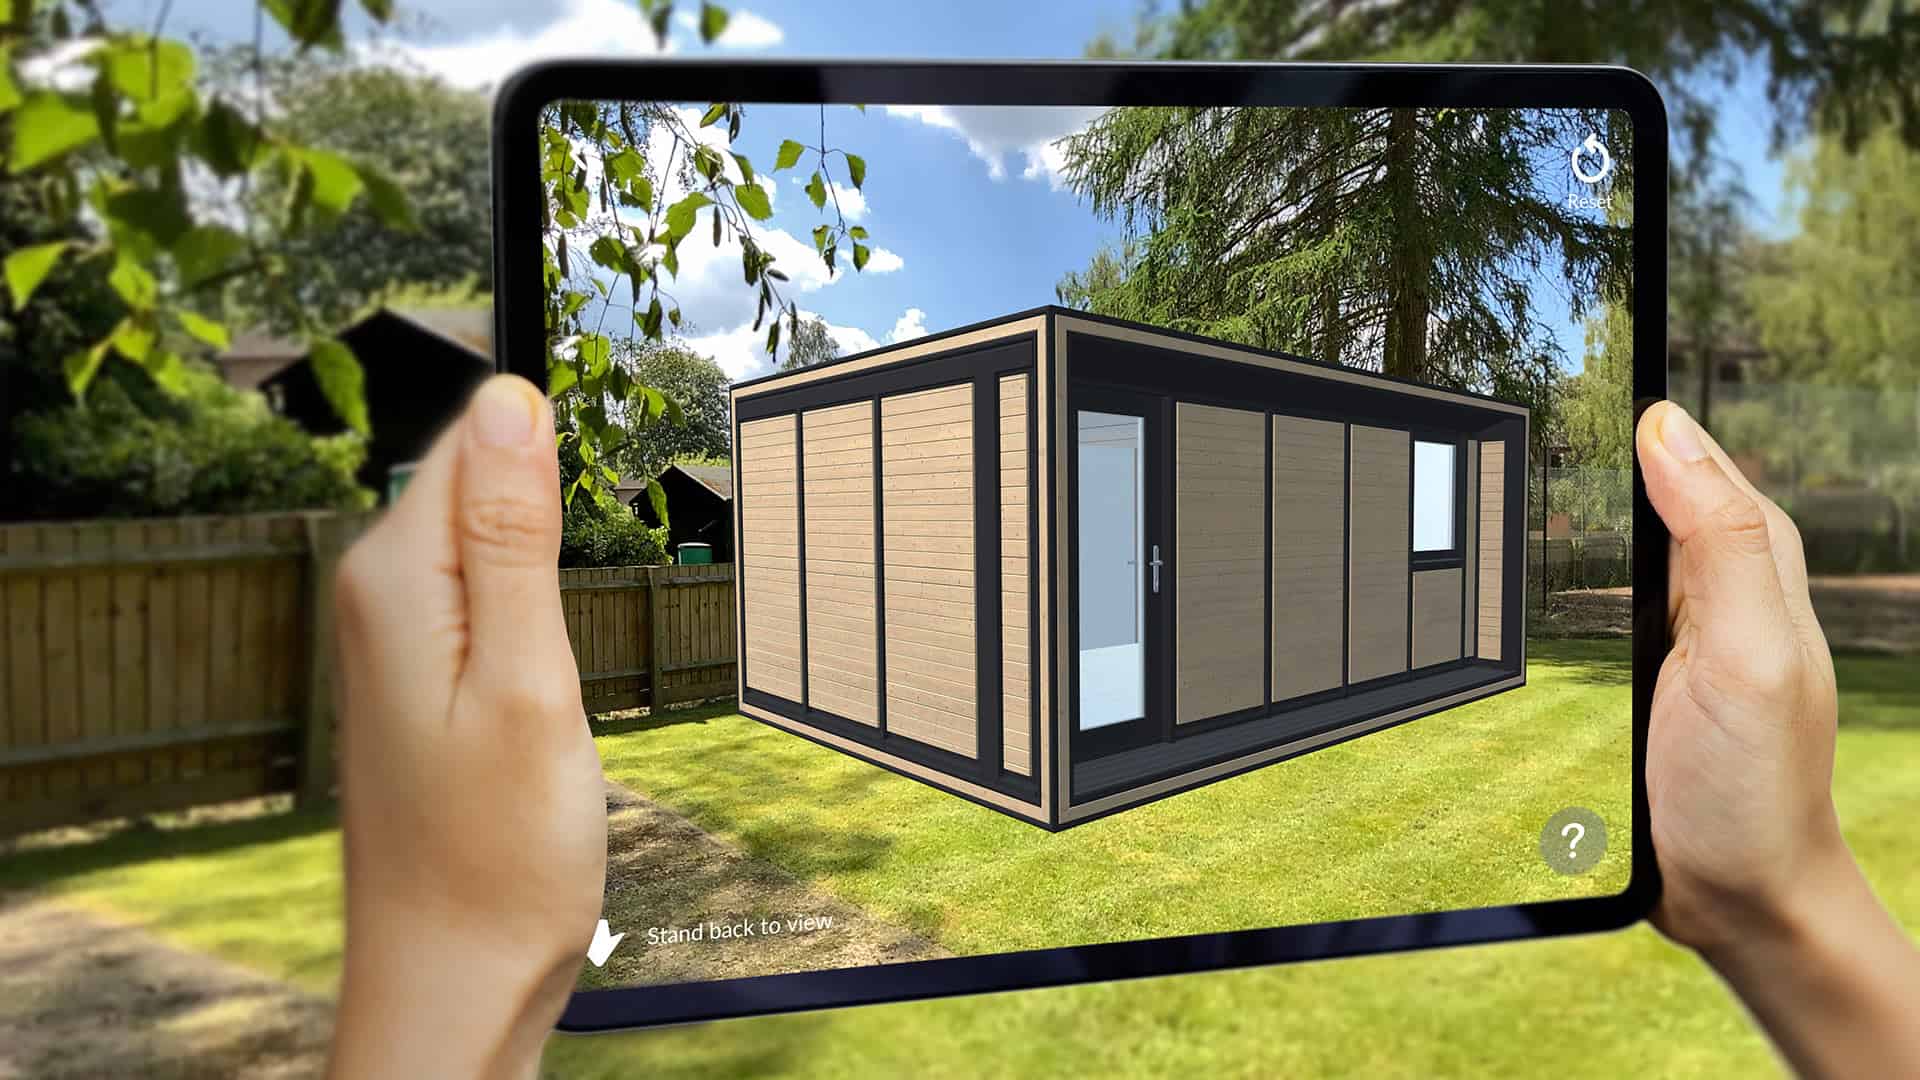 A person holding up a tablet device viewing an AR garden room in their garden.